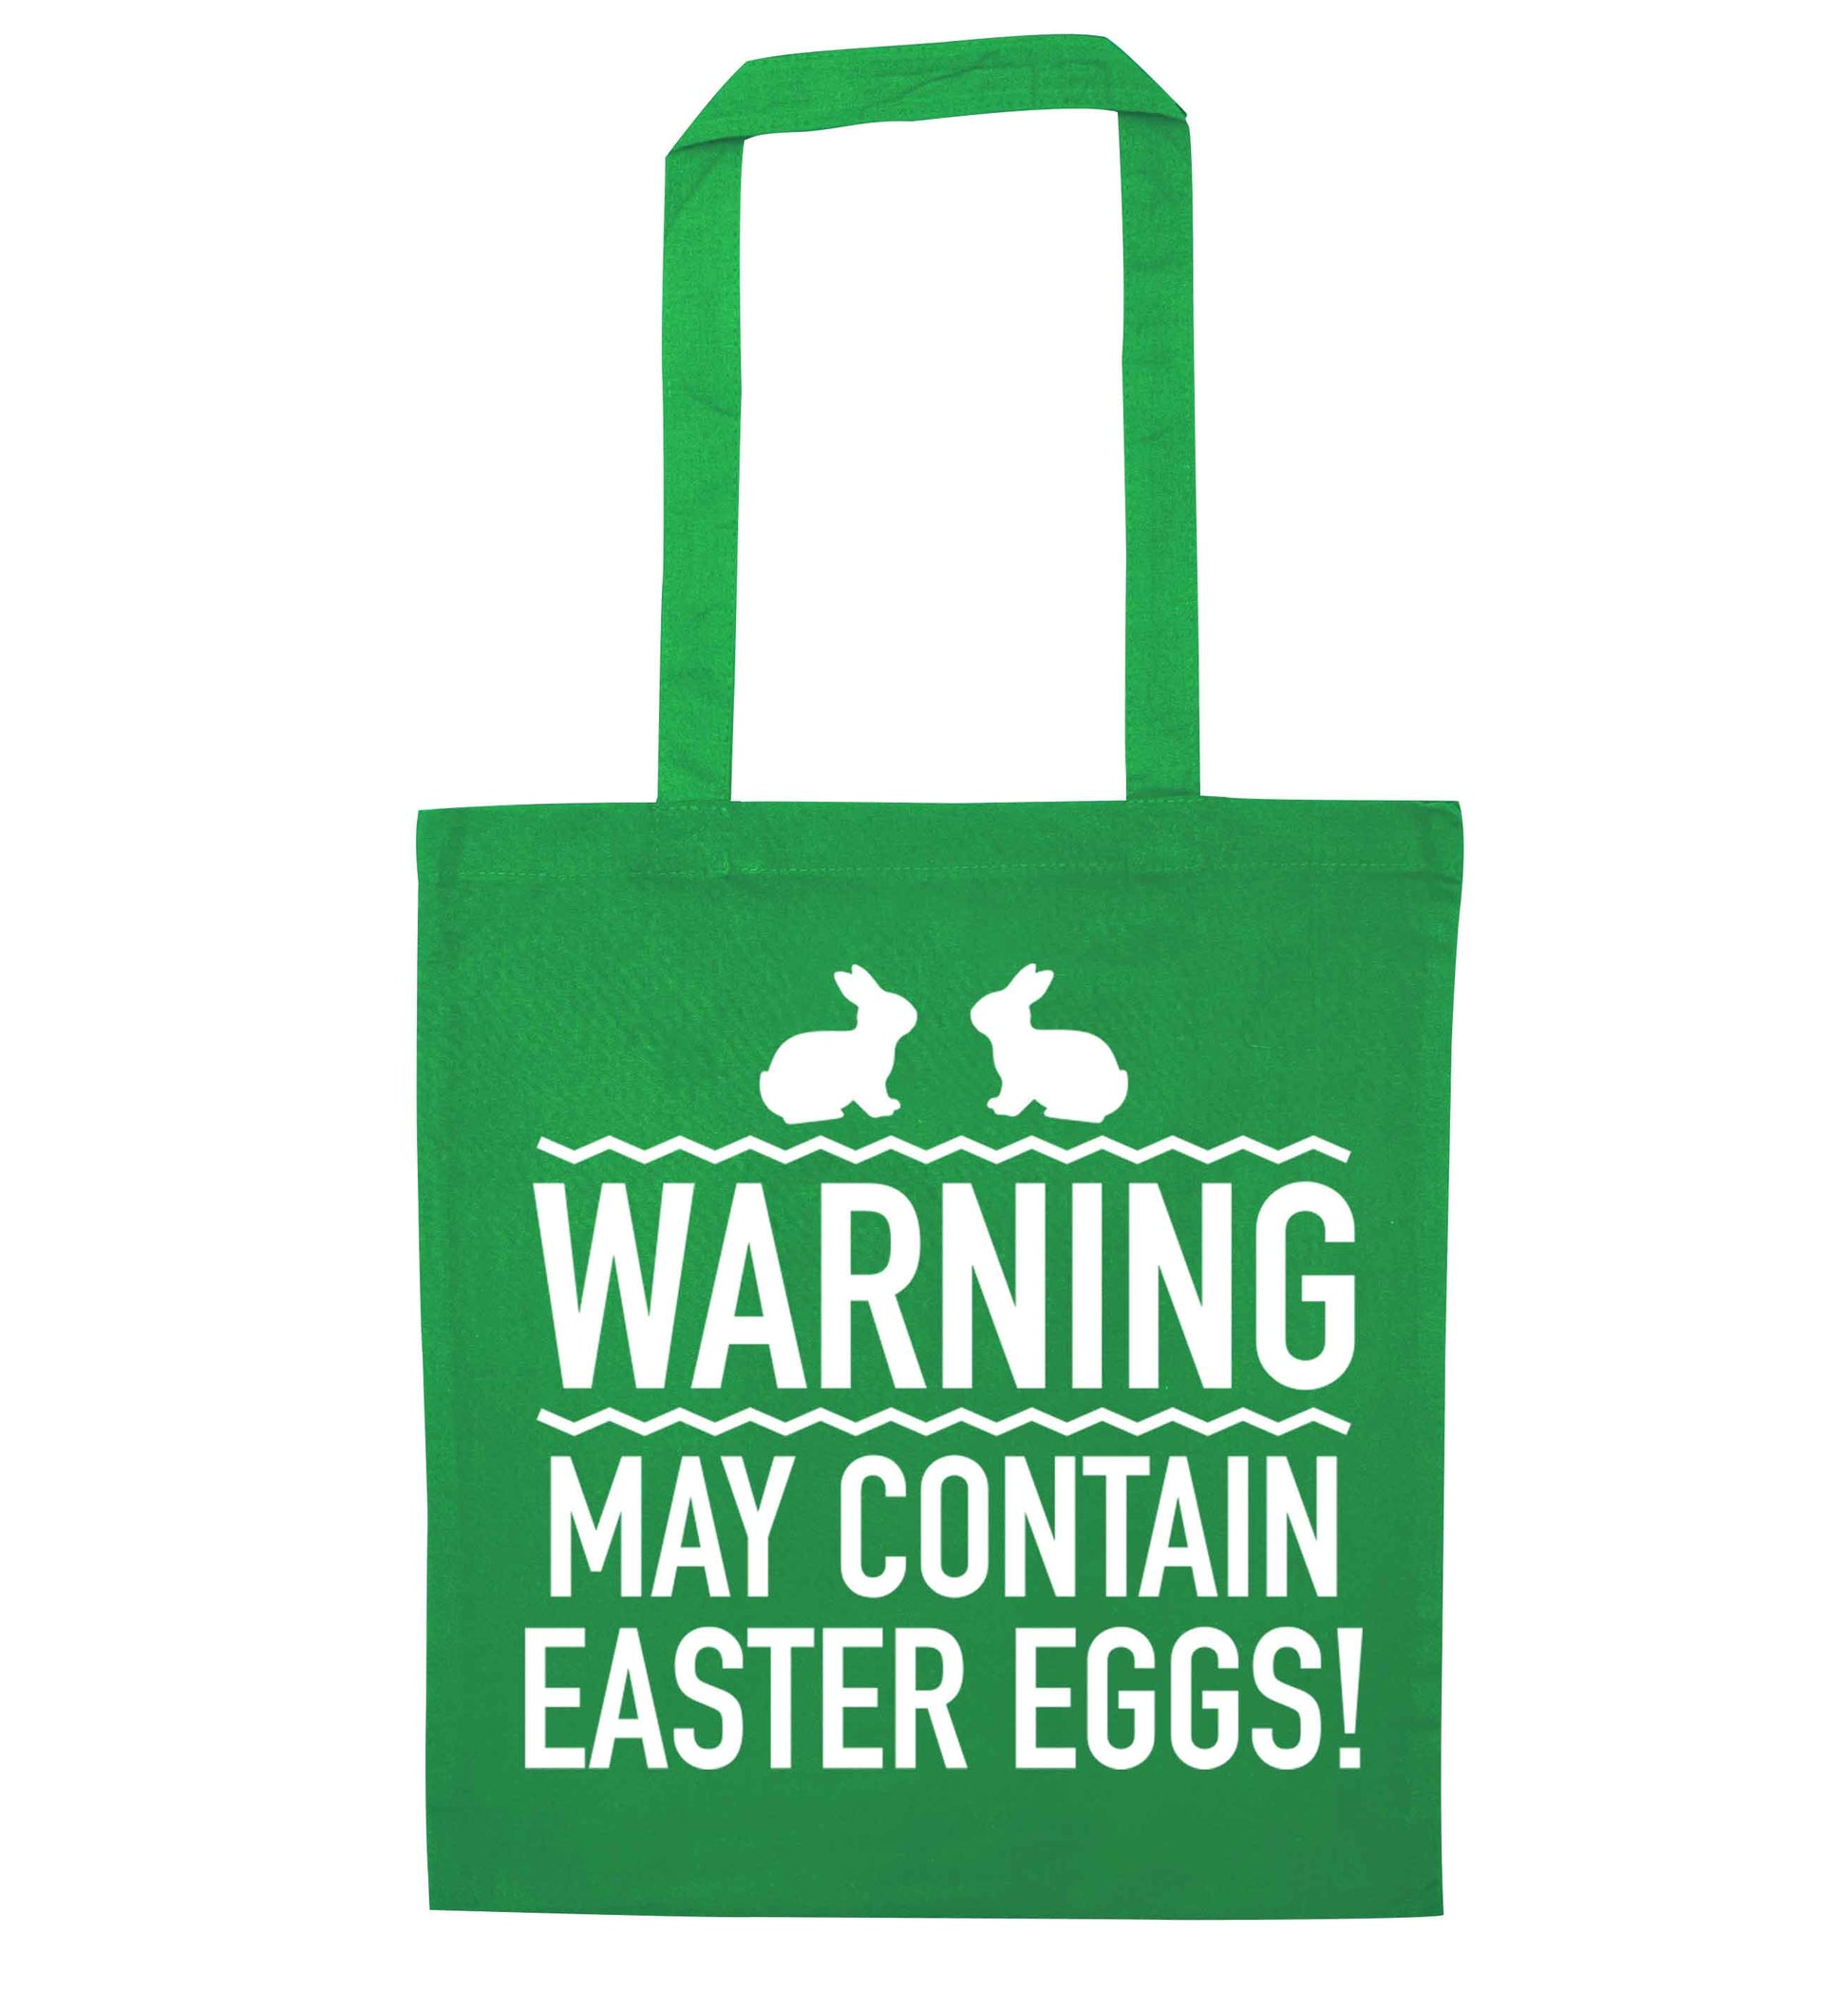 Warning may contain Easter eggs green tote bag